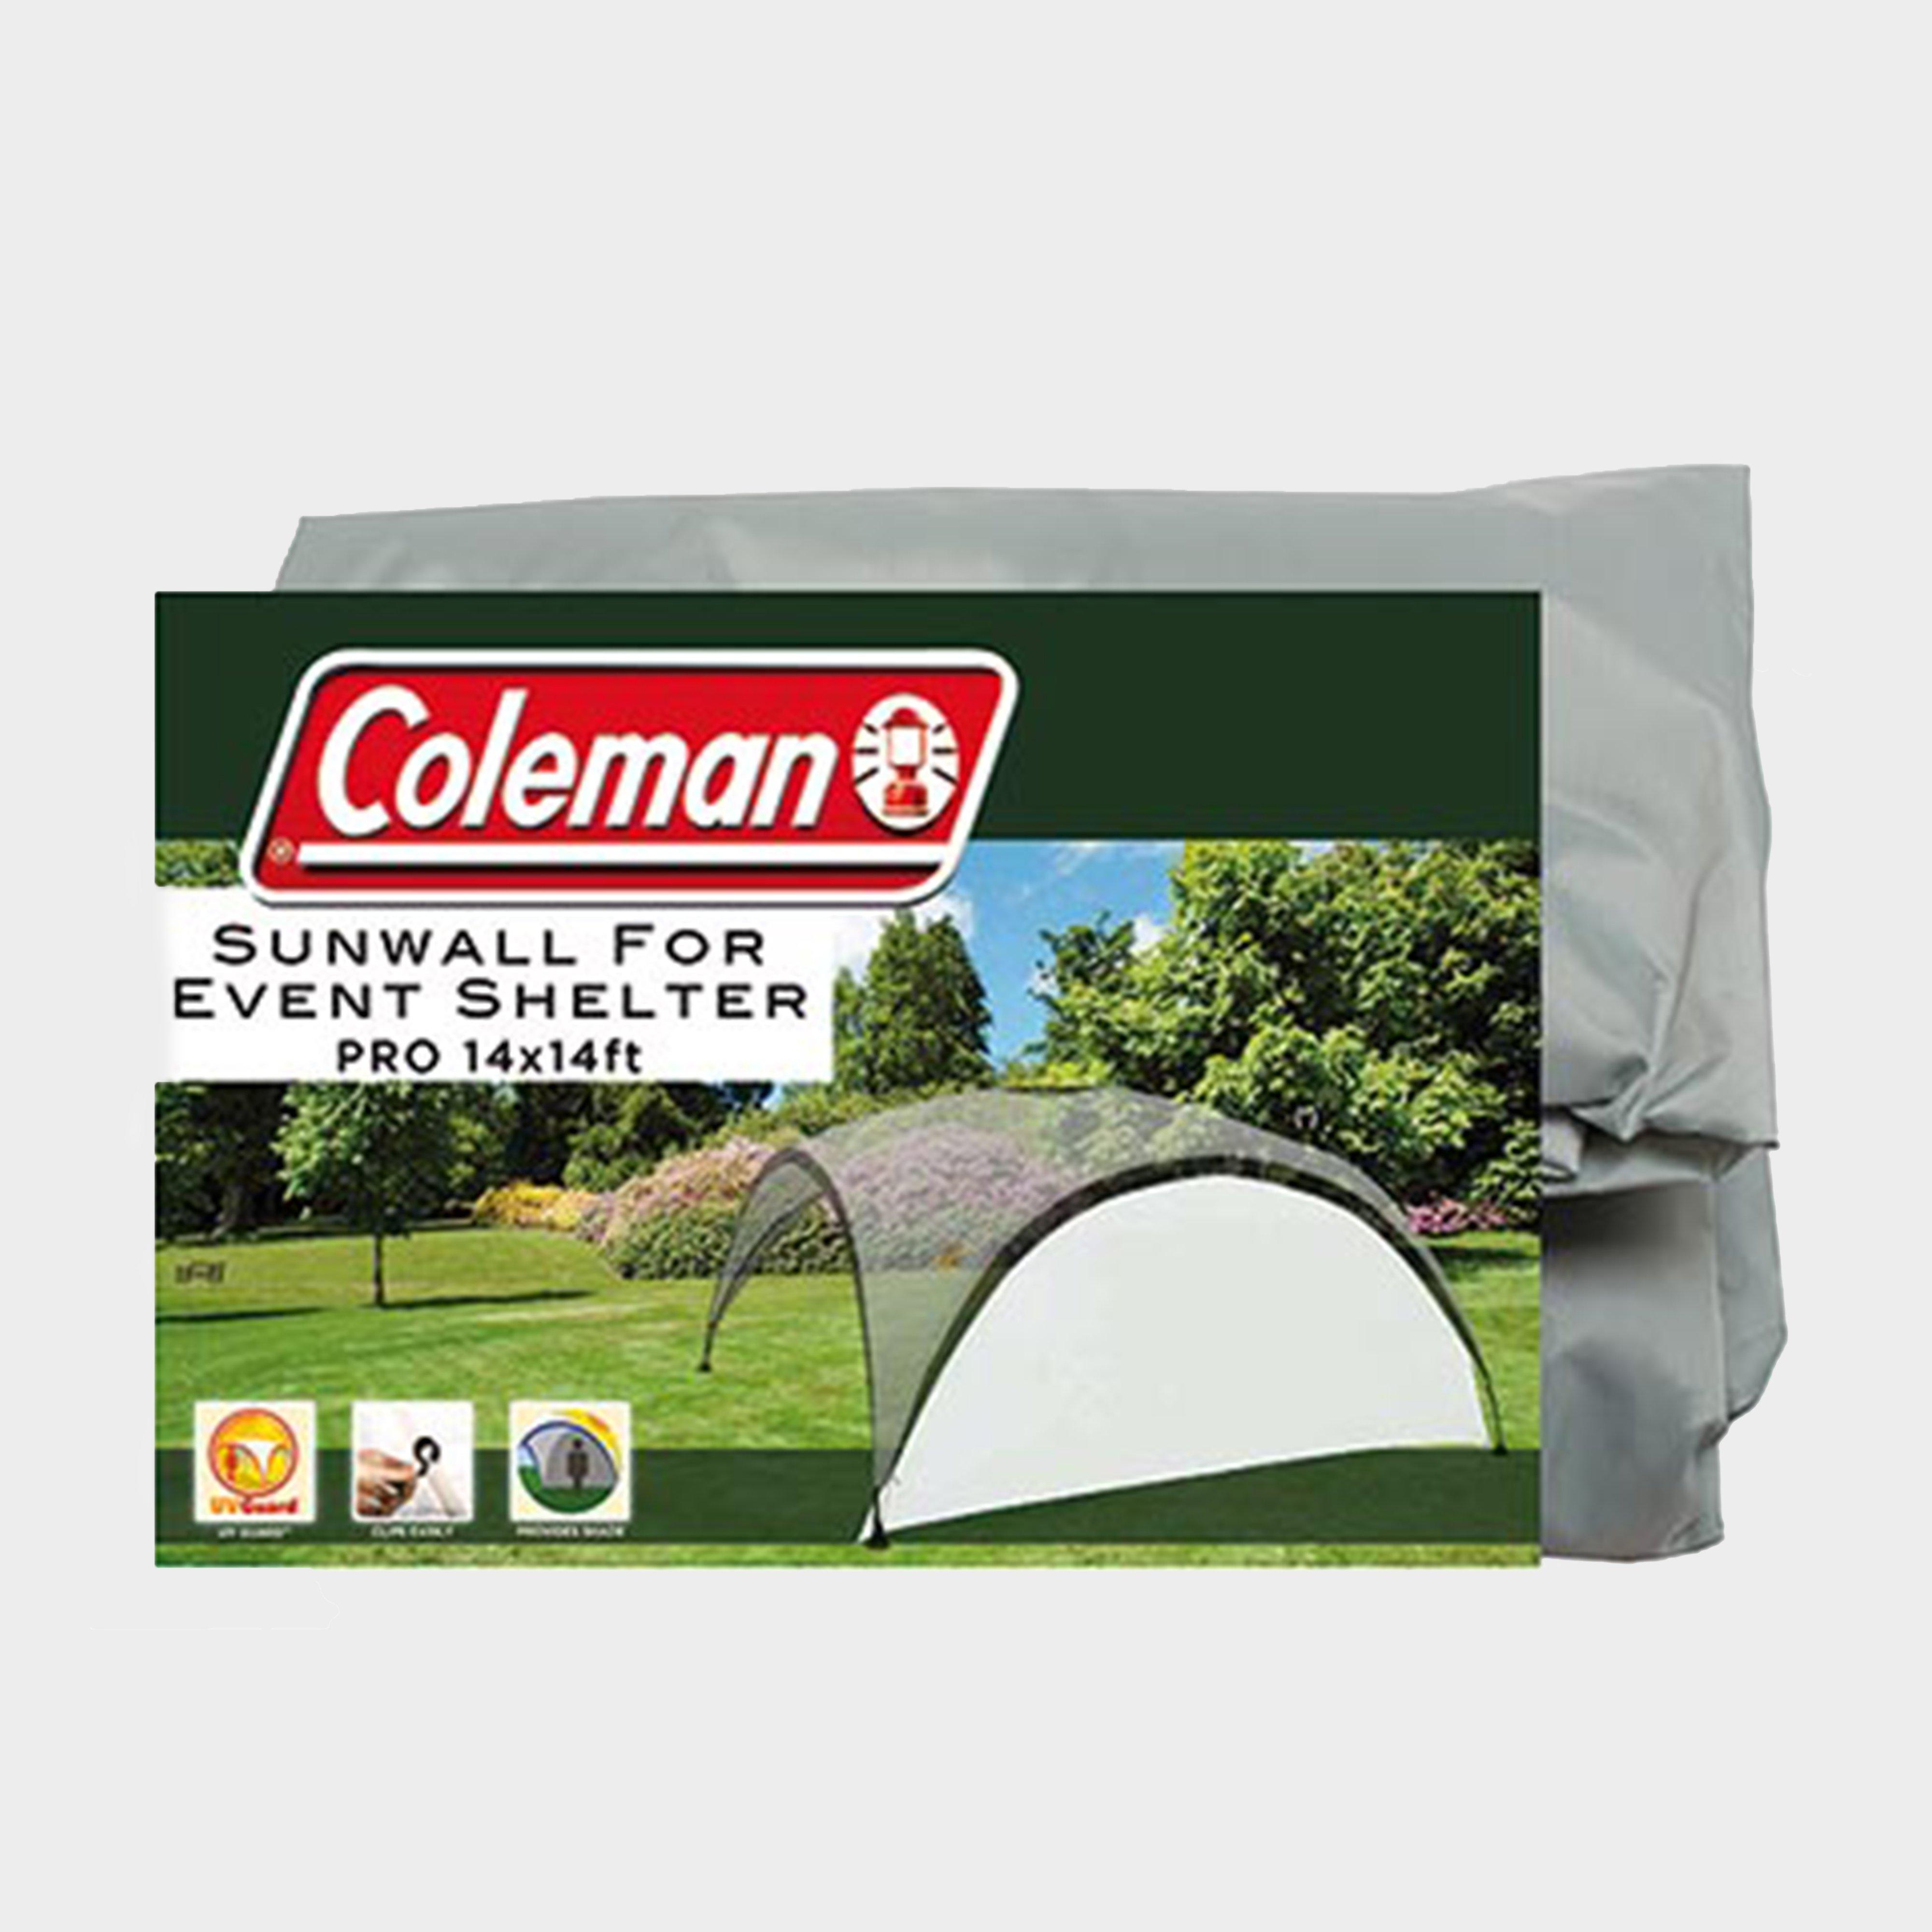 Coleman Coleman Sunwall For Event Shelter Pro (14